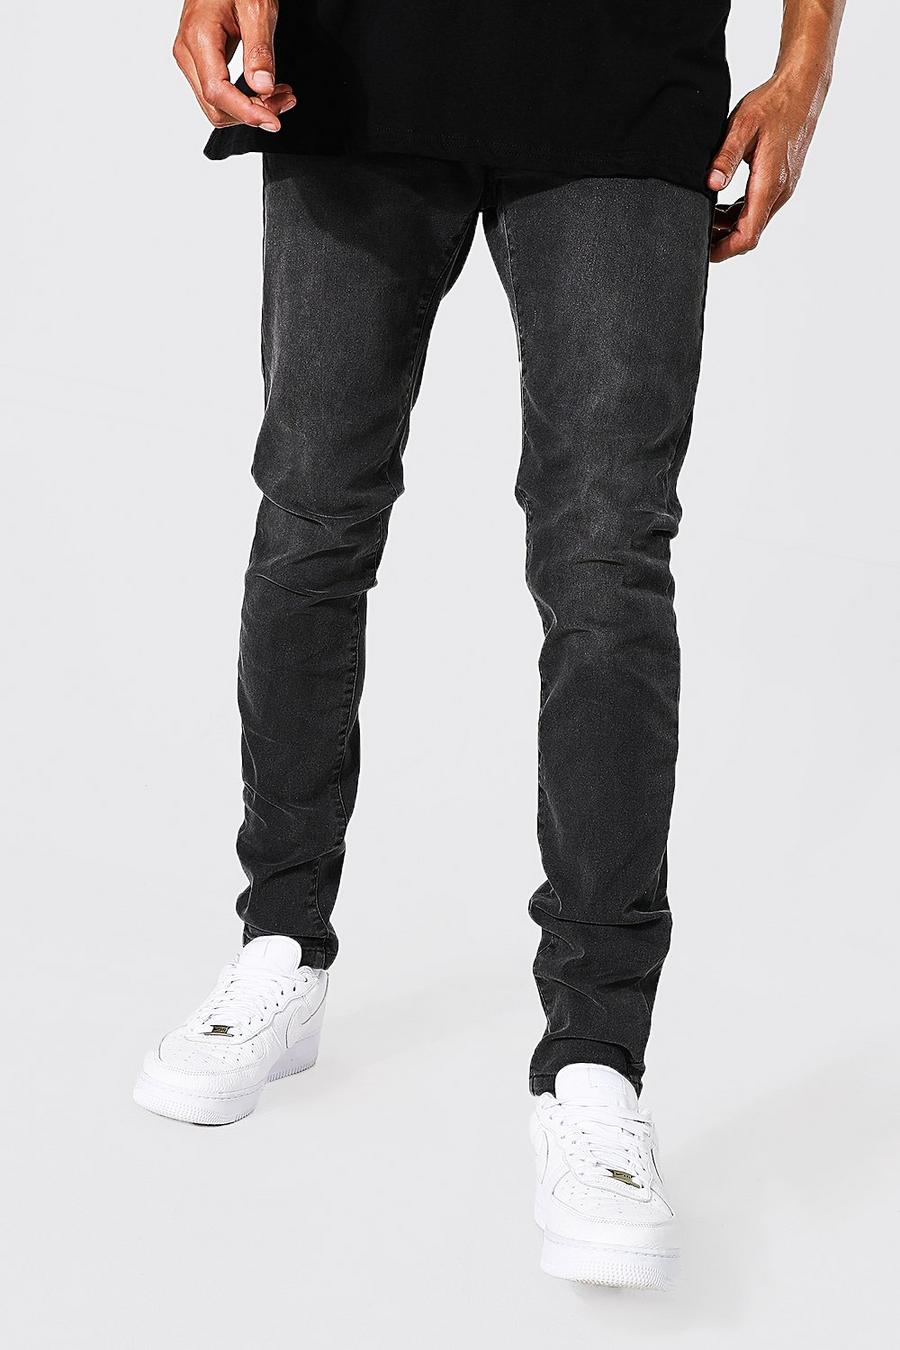 Charcoal gris Tall Skinny Stretch Jean With Cotton